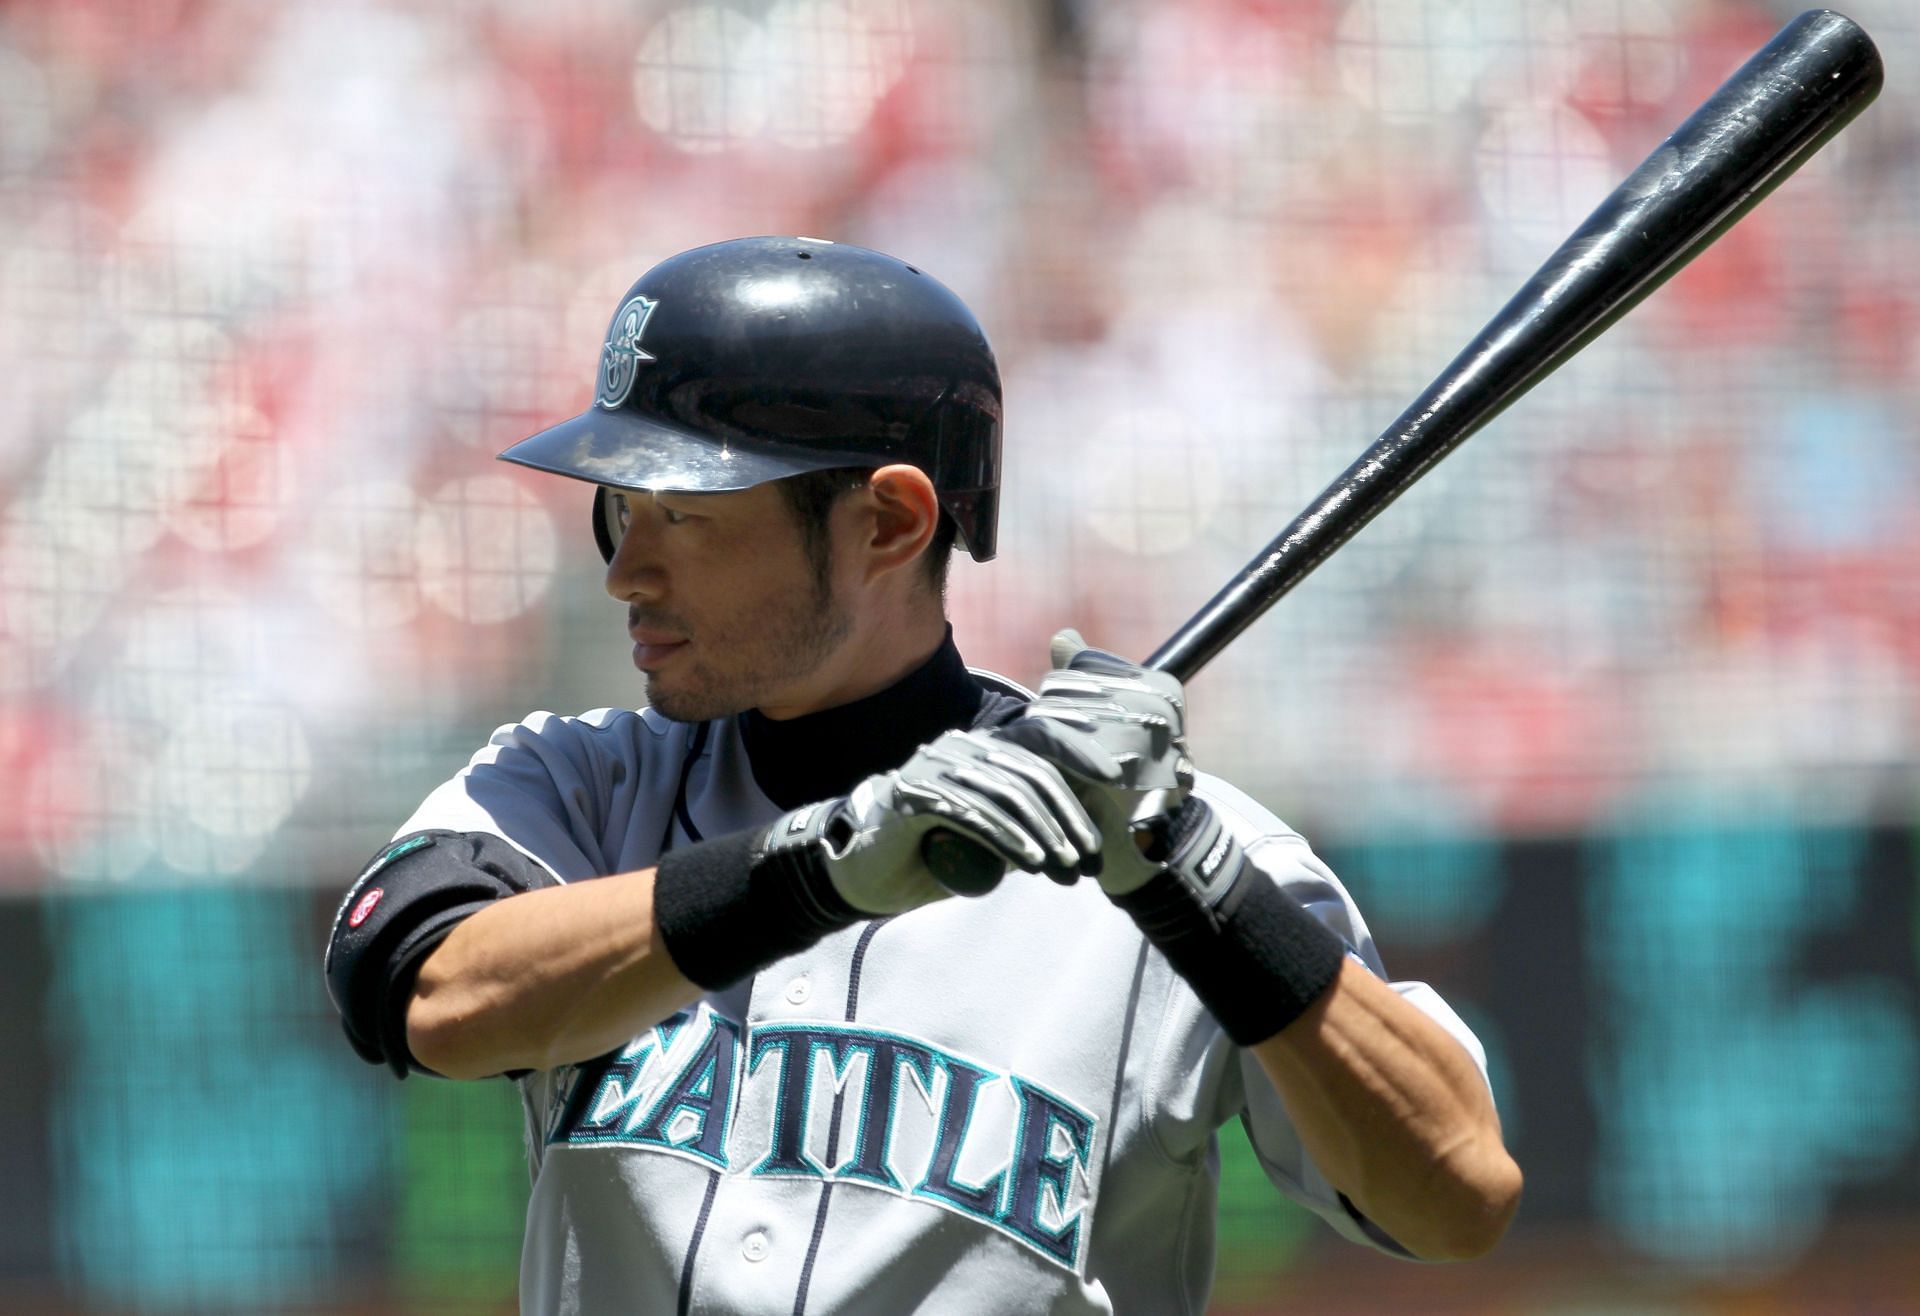 Will Ichiro Be Our Last Universally Beloved Superstar? - The Ringer